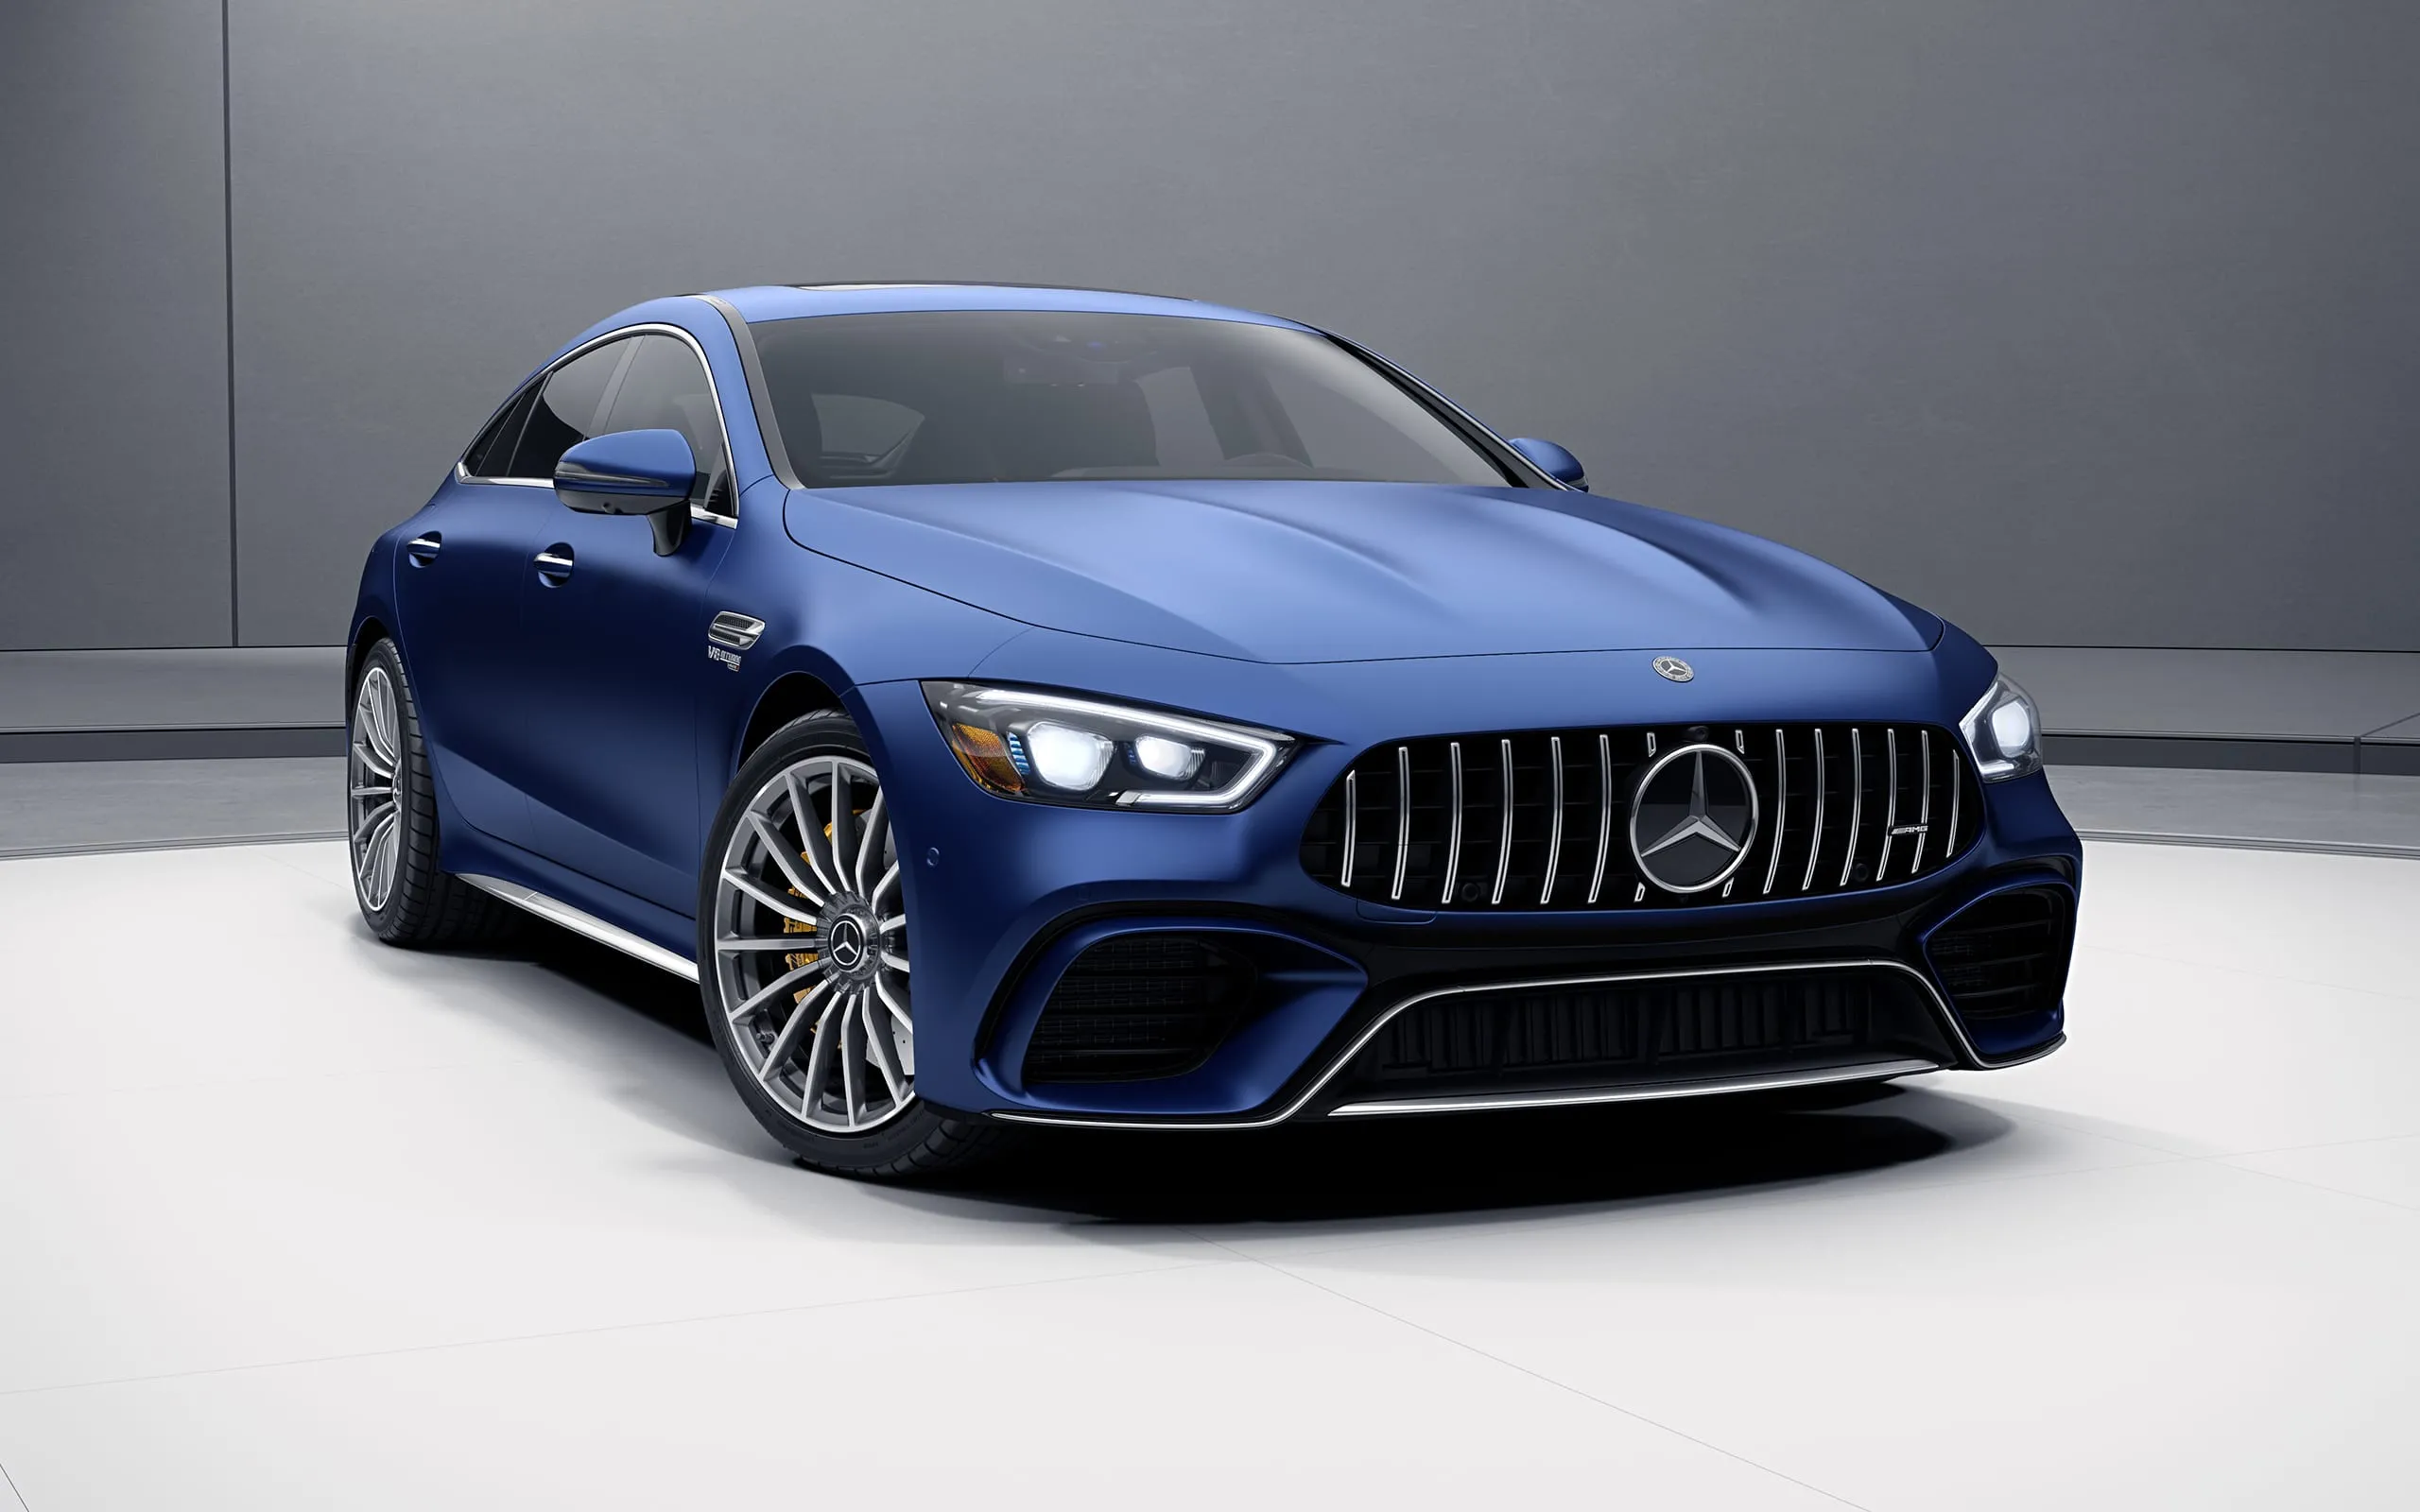 https://www.mbusa.com/content/dam/mb-nafta/us/myco/my21/gt/4-door/gallery/amg/gallery-class-page/2021-AMG-GT-4DR-COUPE-GAL-009-S-WP.jpg